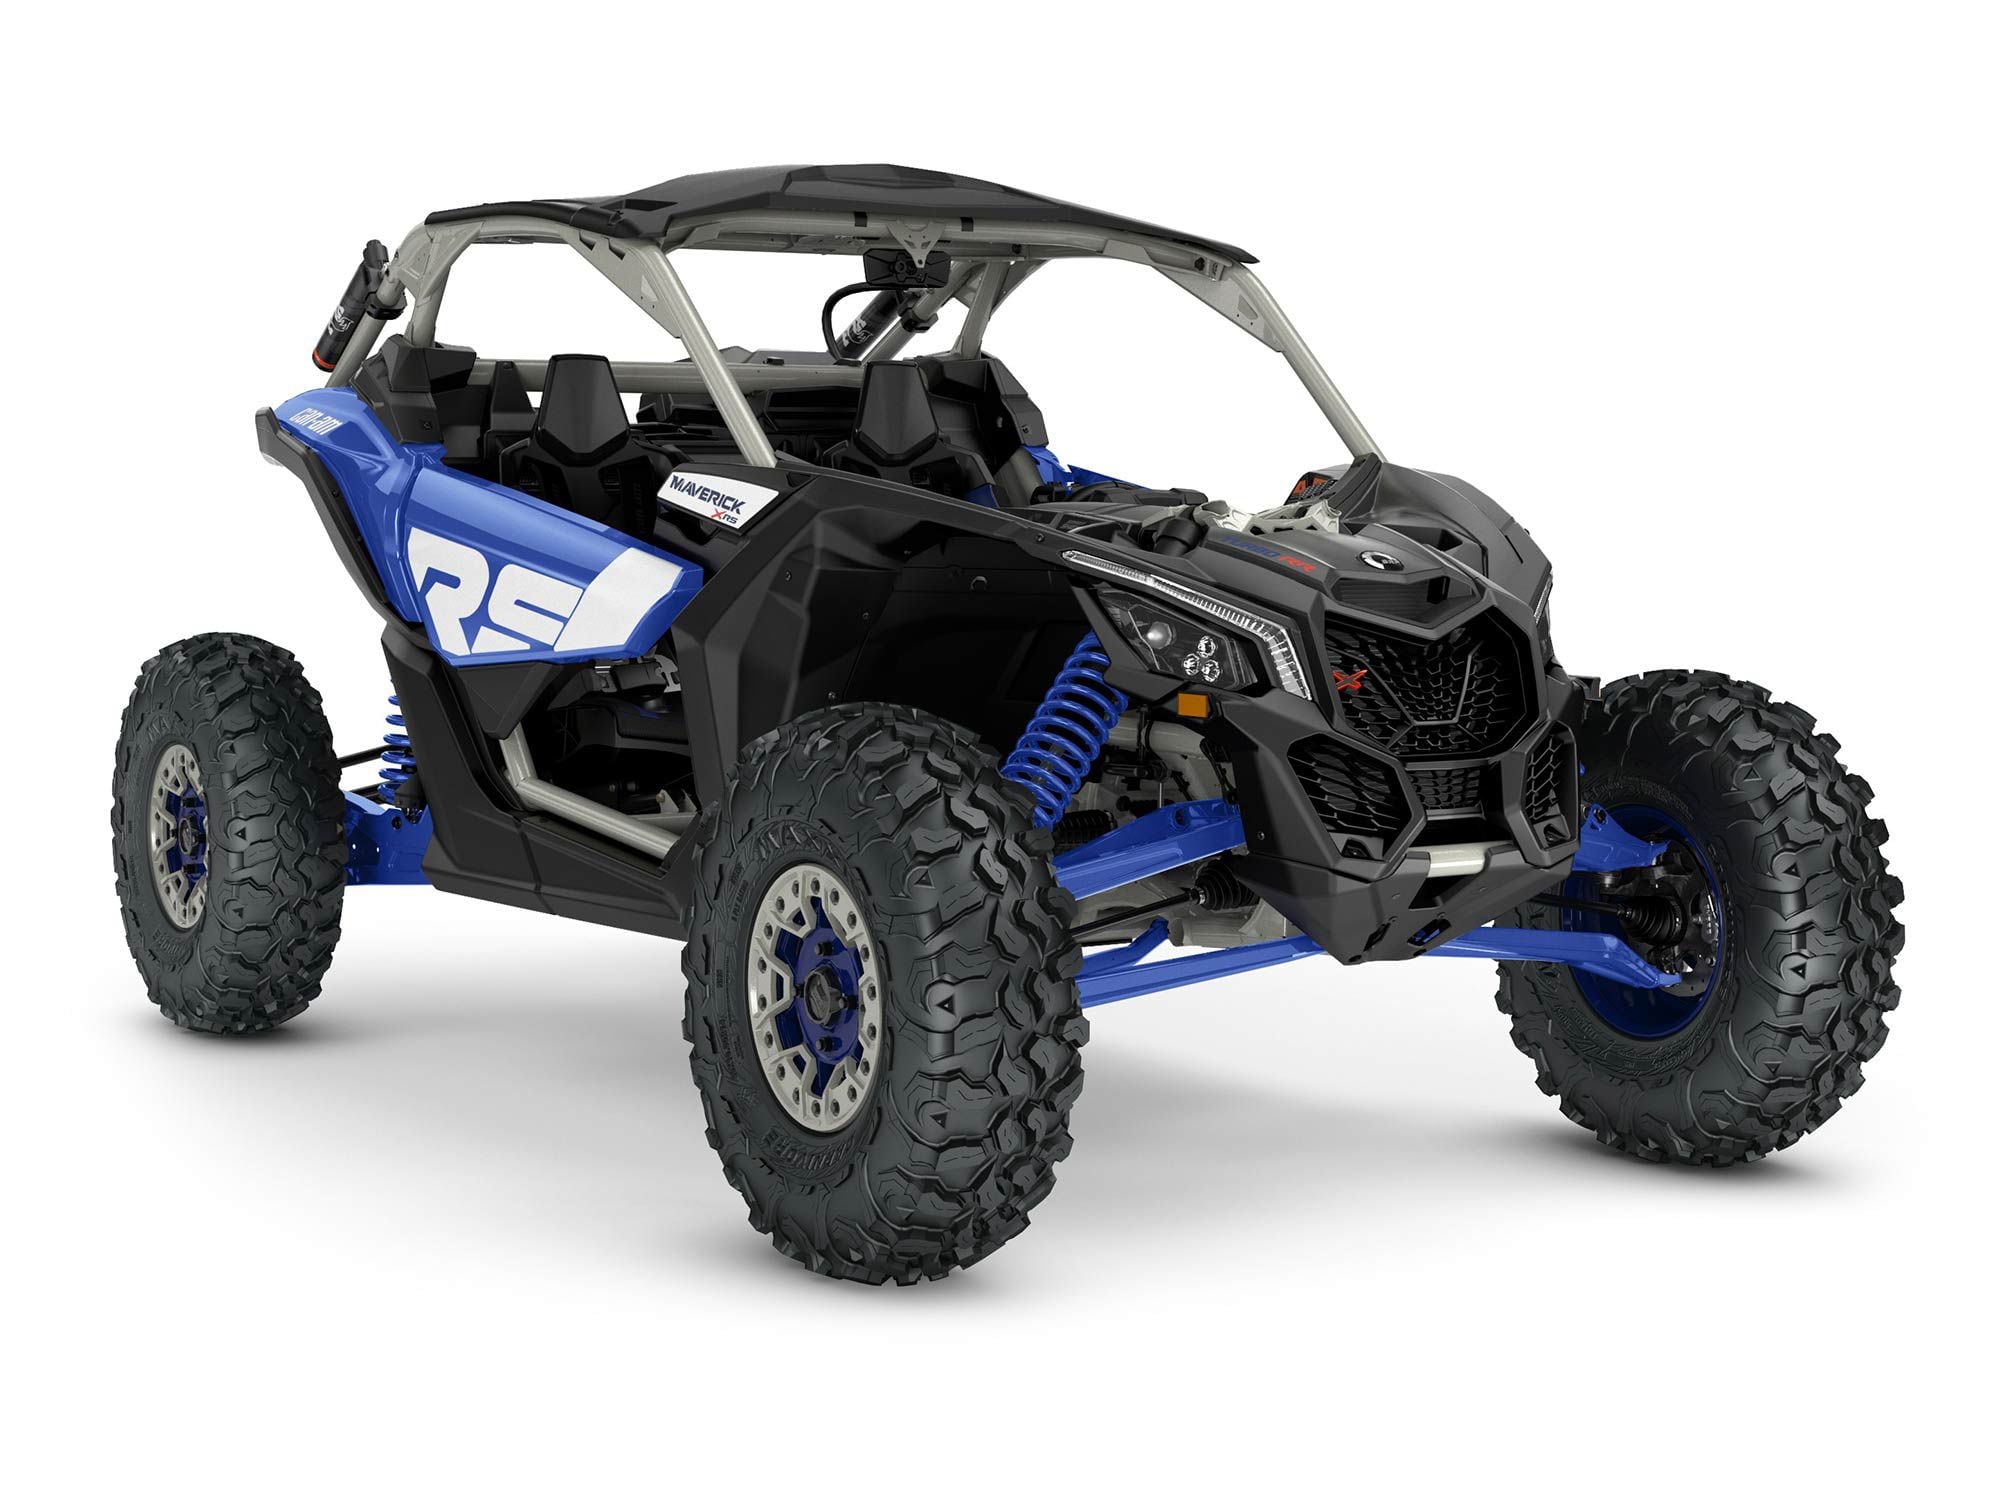 2022 Can-Am Maverick X3 X RS Turbo RR with Smart Shox front view in Intense Blue, Carbon Black, and Chalk Gray color.